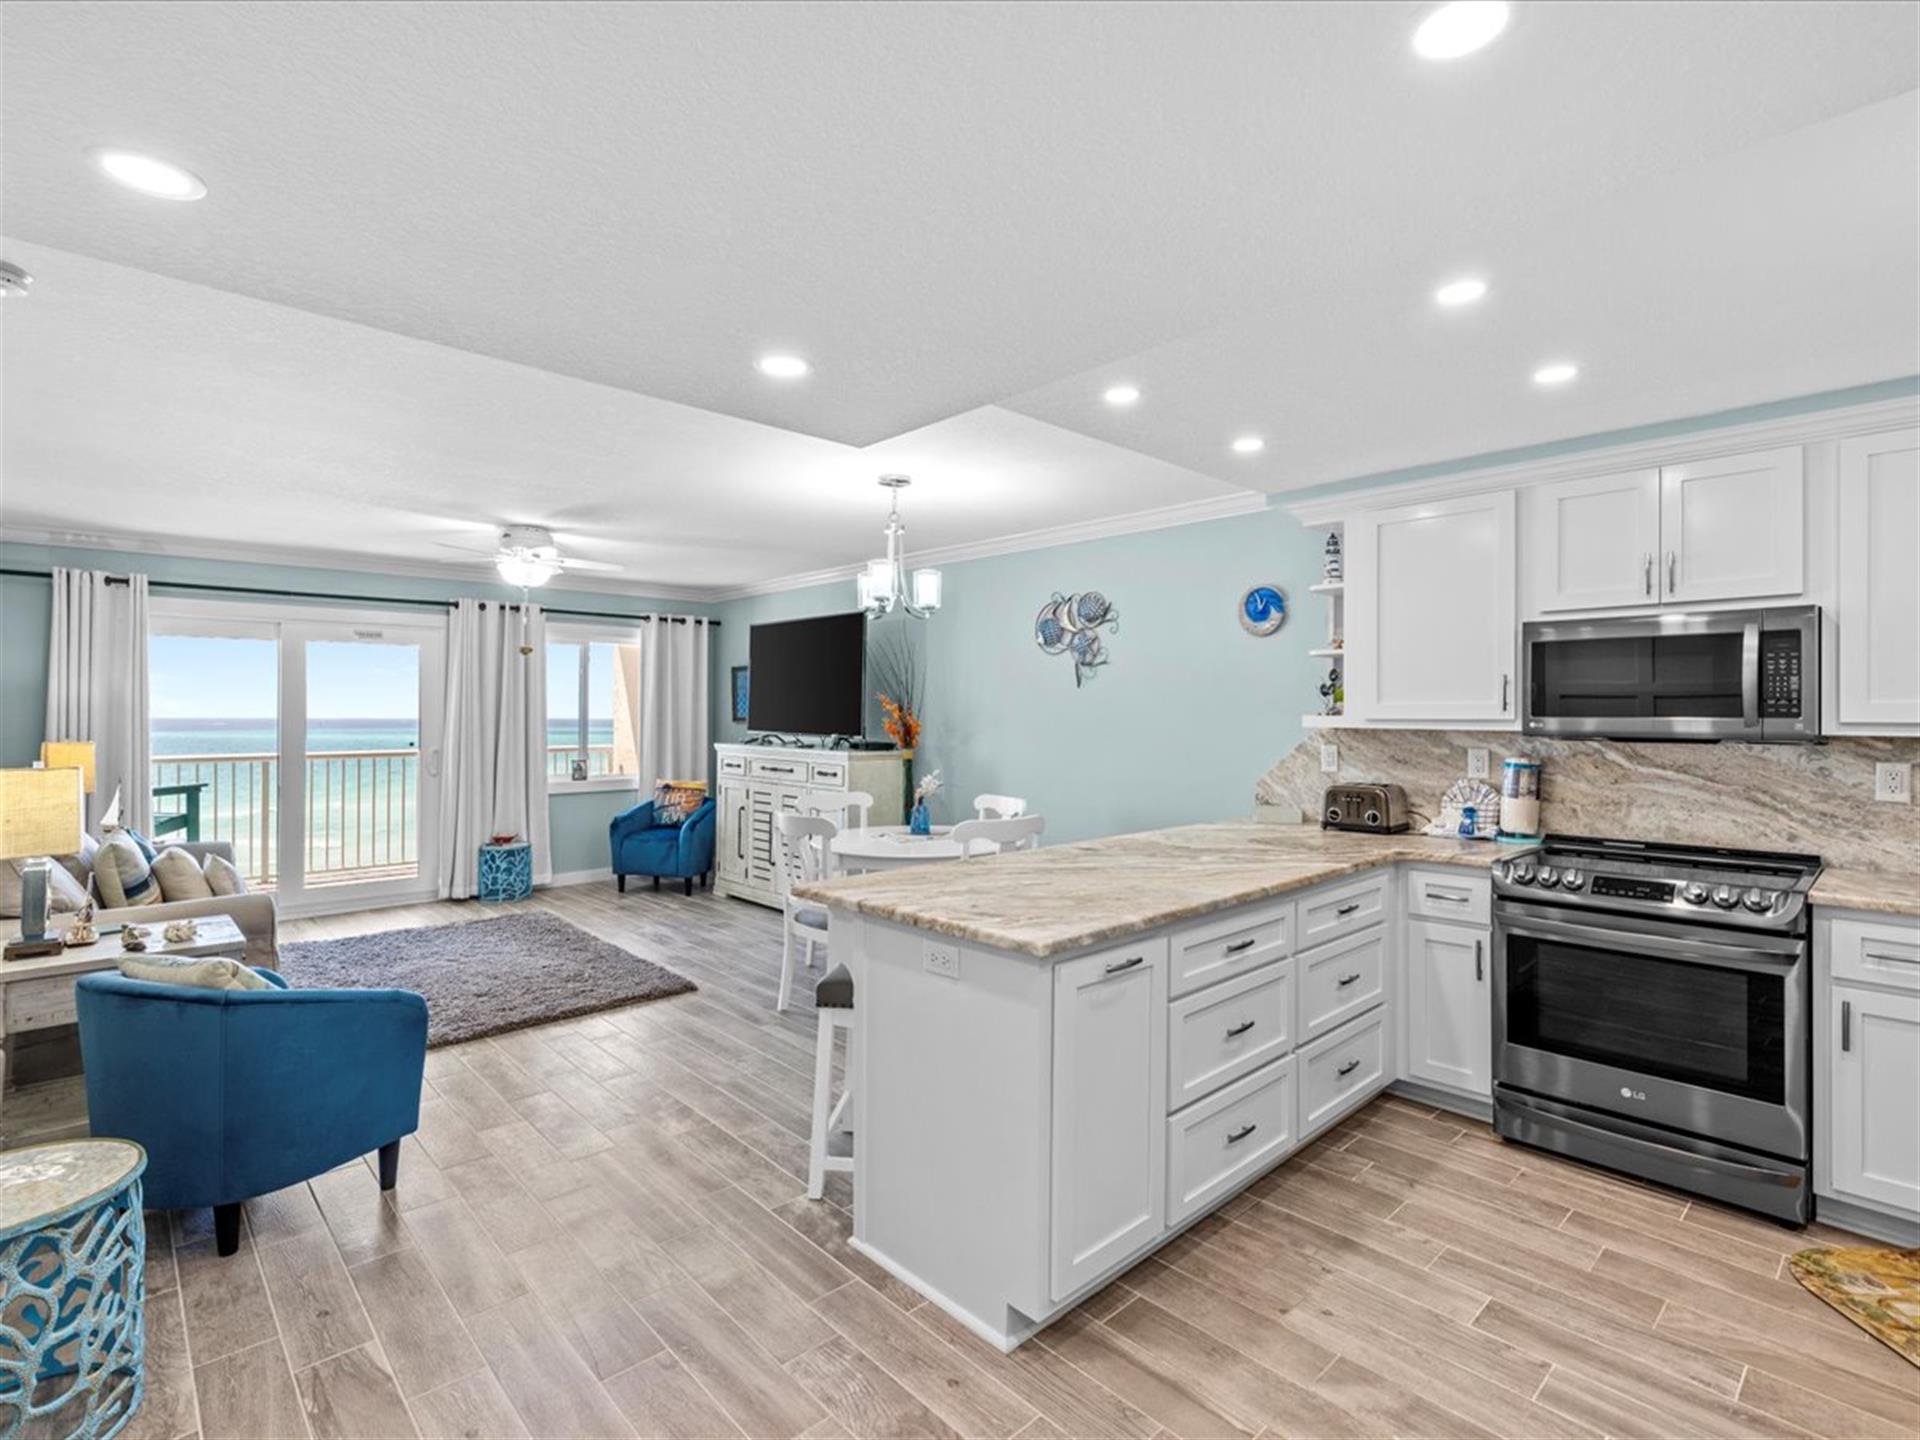 HSRC 722 KitchenLiving Areas With Gulf View